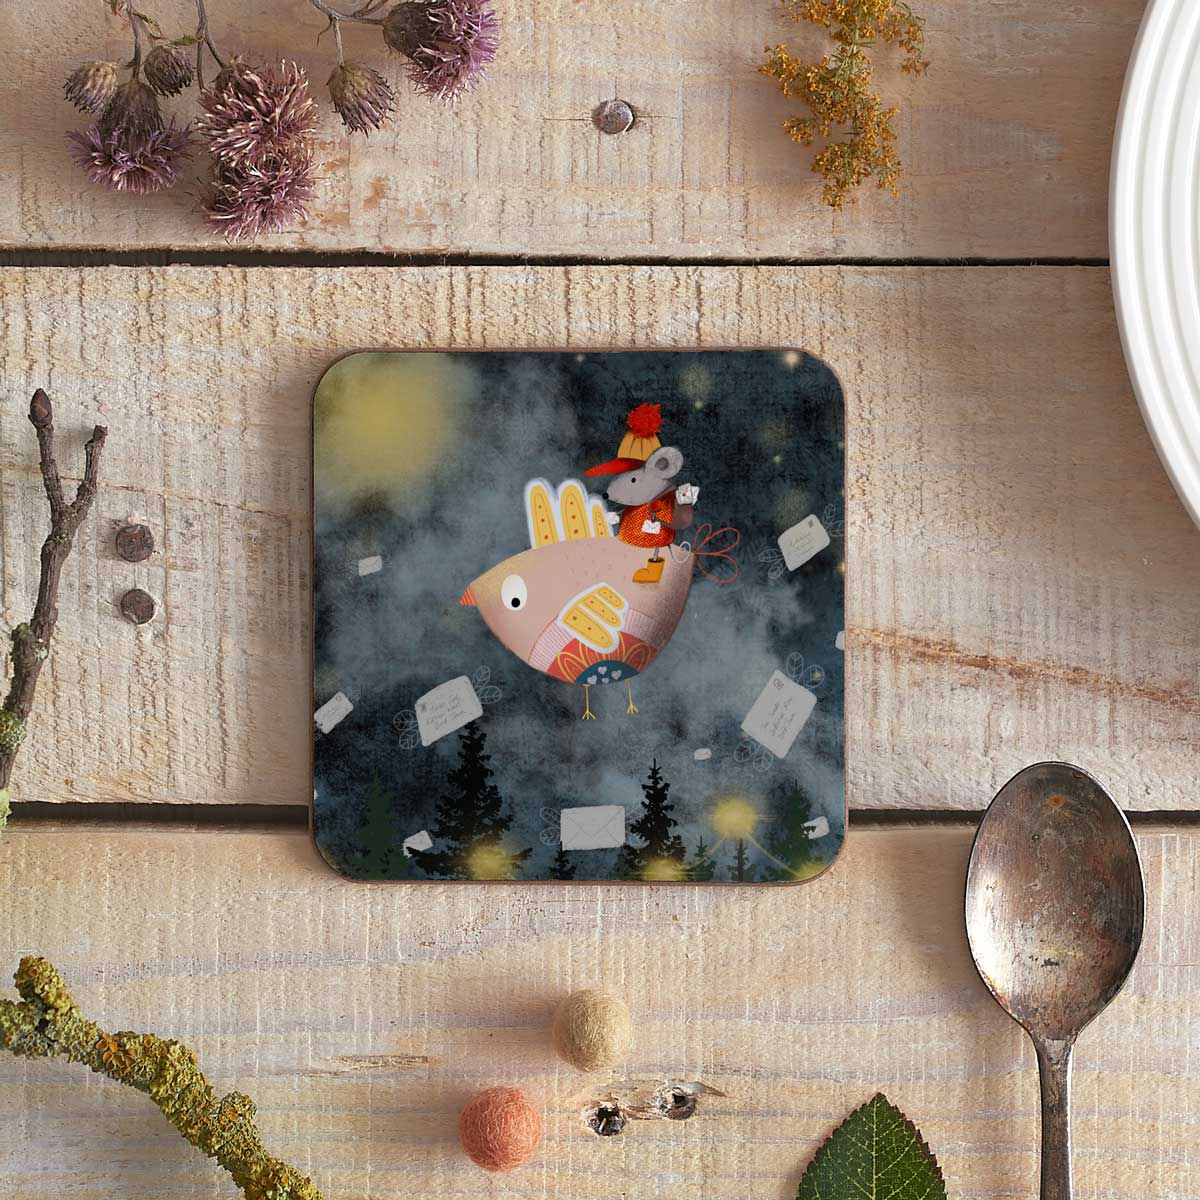 square coaster with an illustration of a birdie with mouse passenger delivering letters